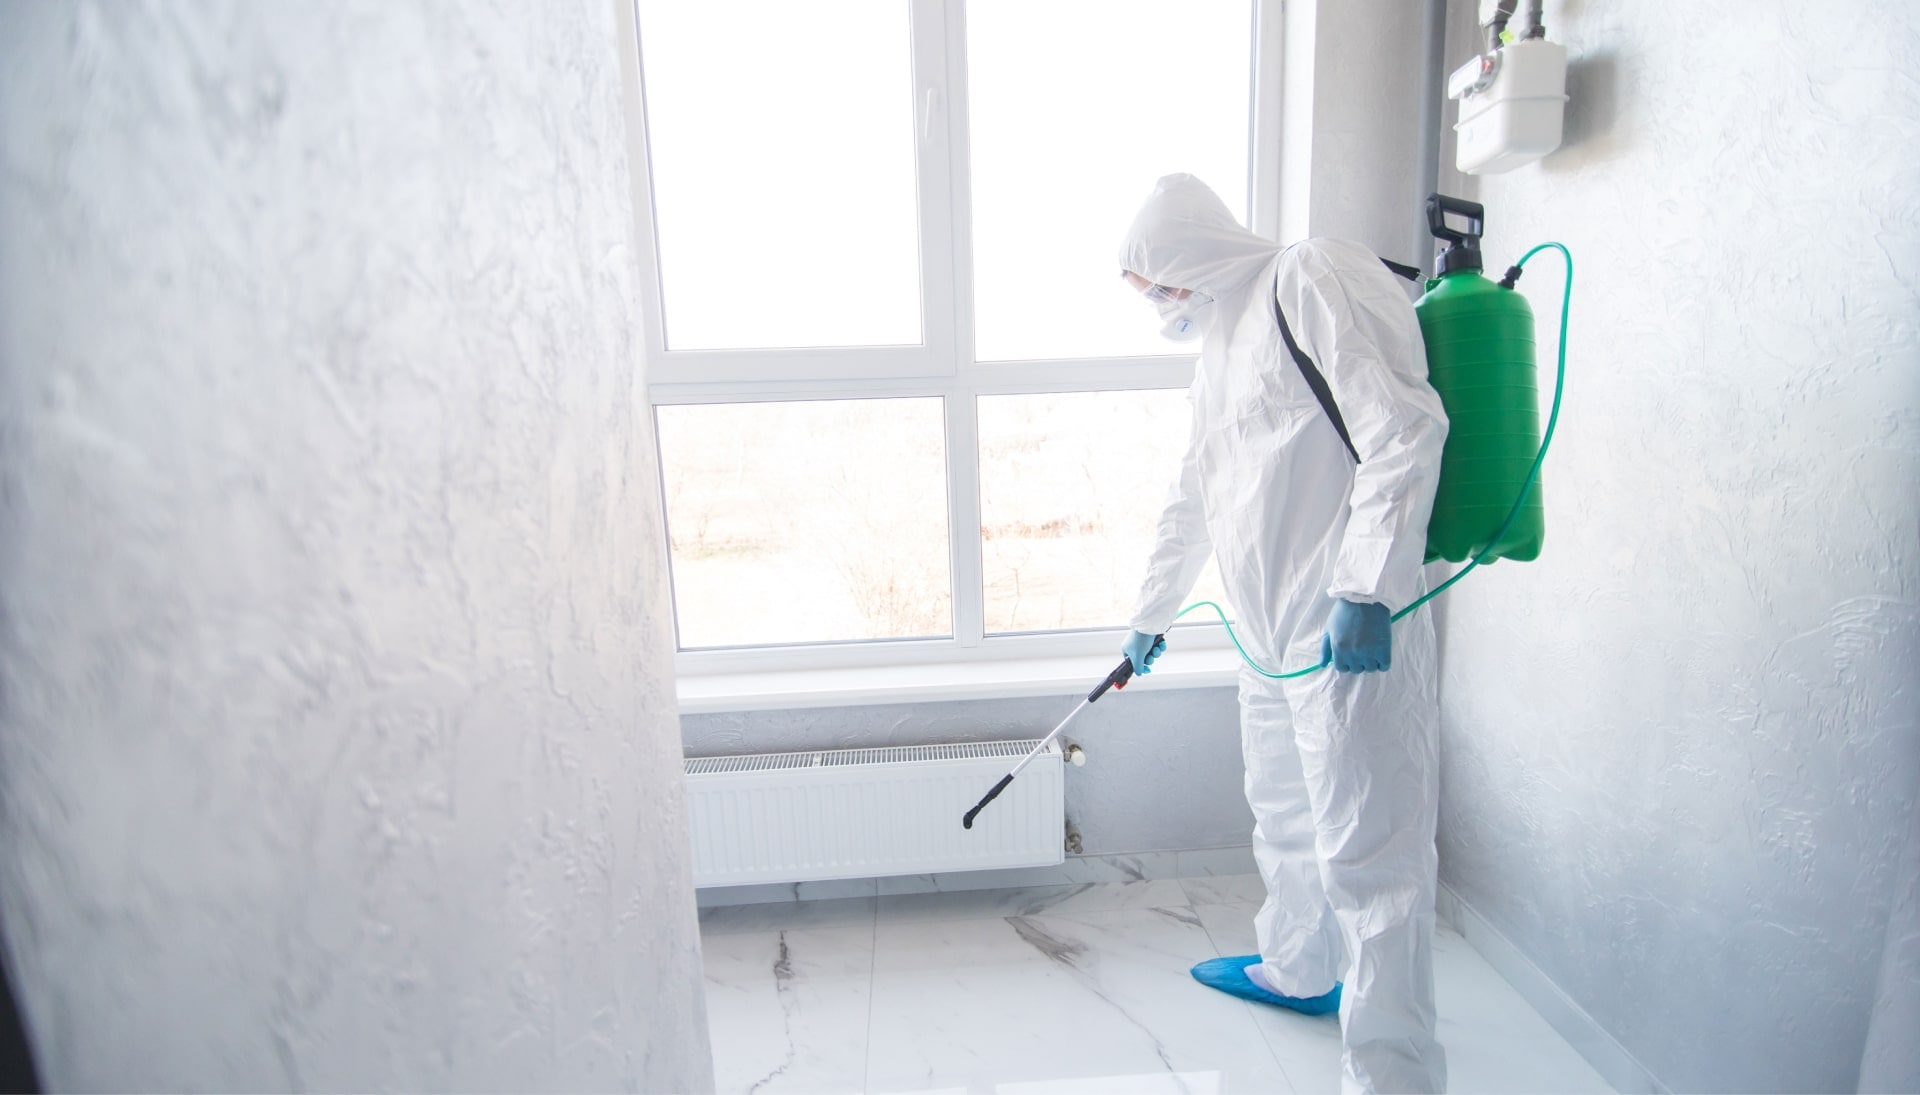 We provide the highest-quality mold inspection, testing, and removal services in the Edmond, Oklahoma area.